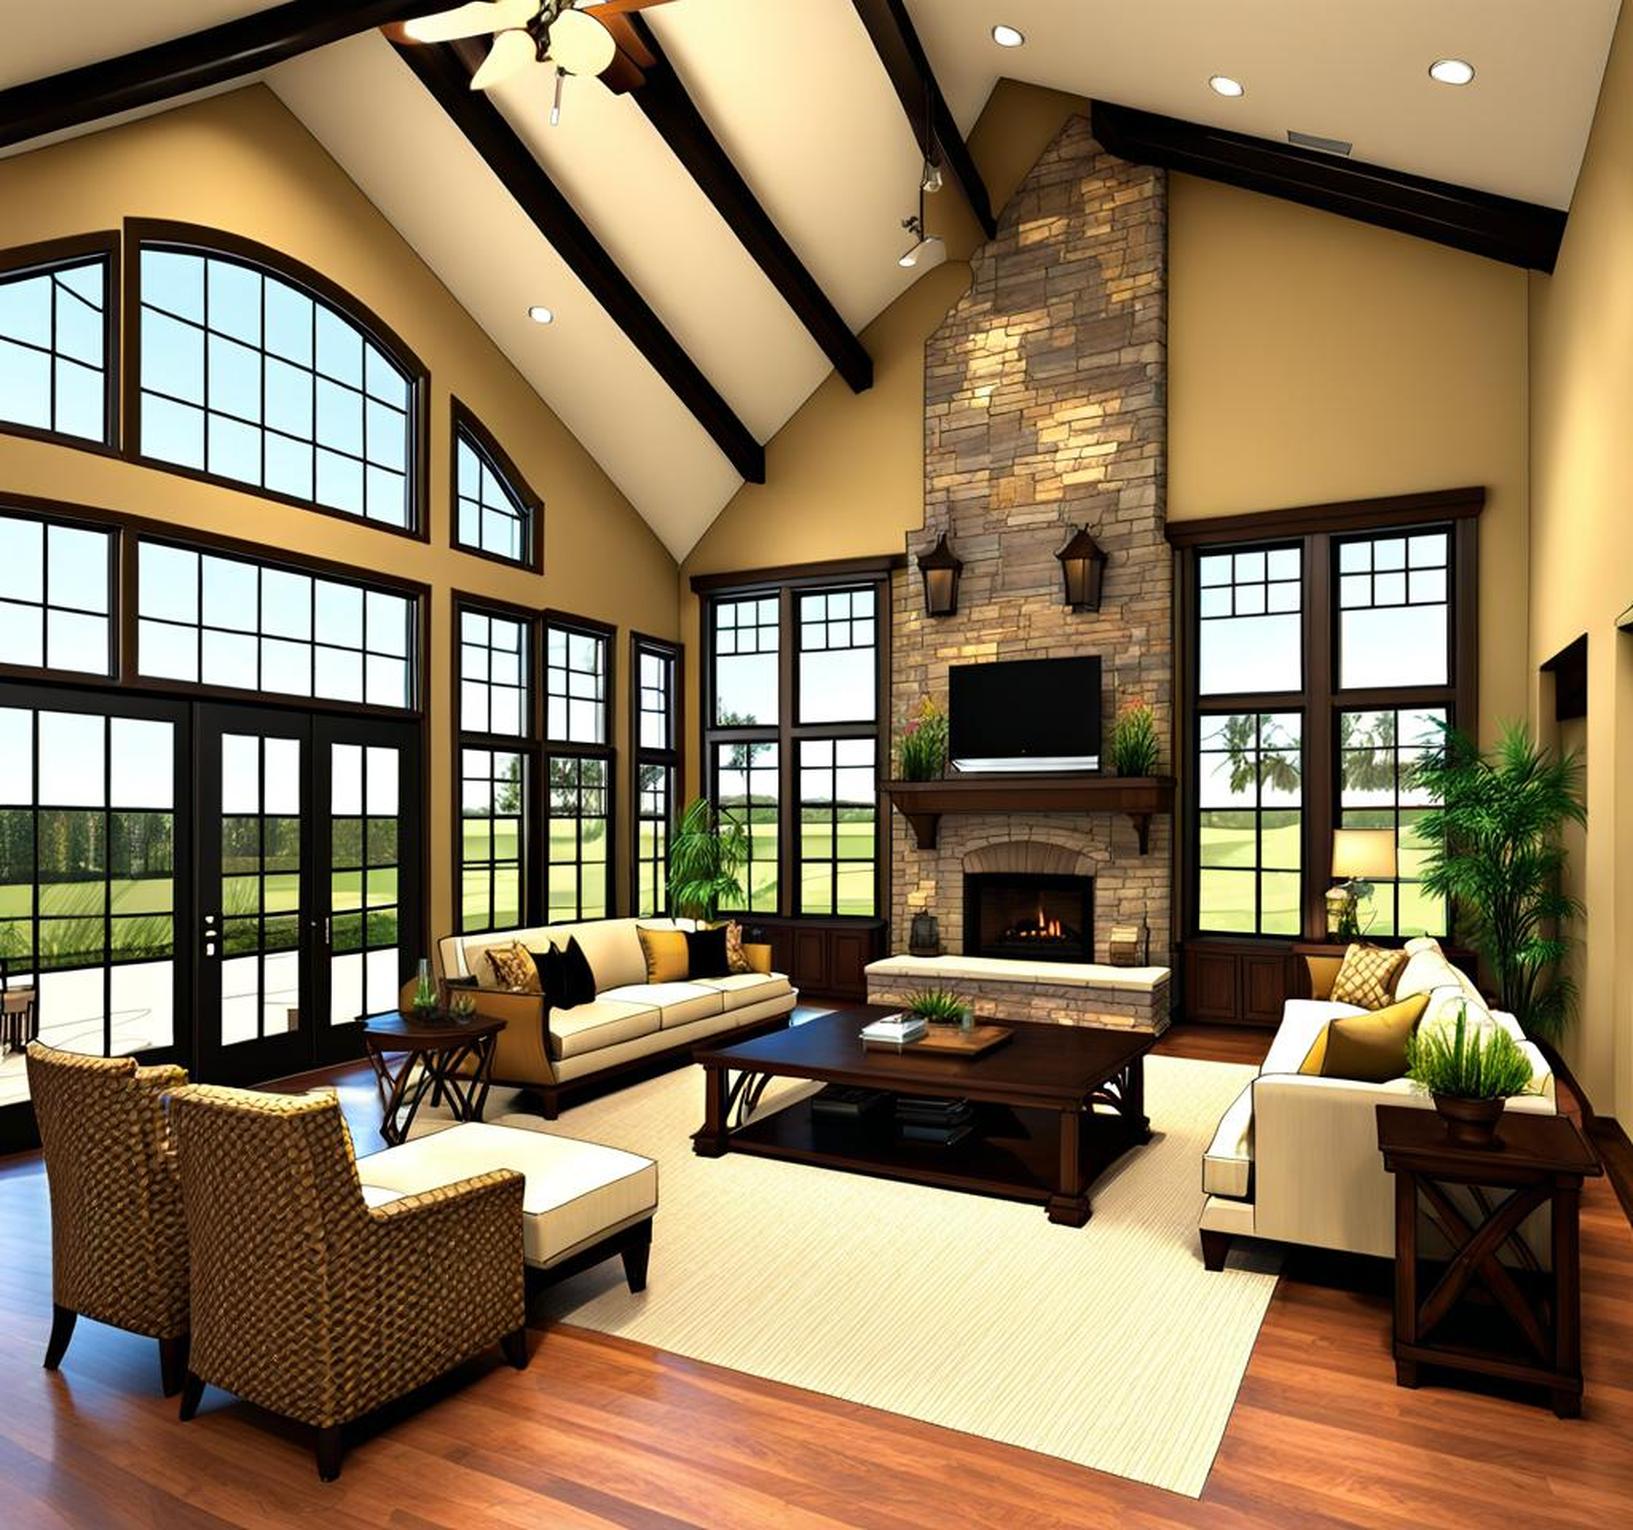 2 story great room house plans